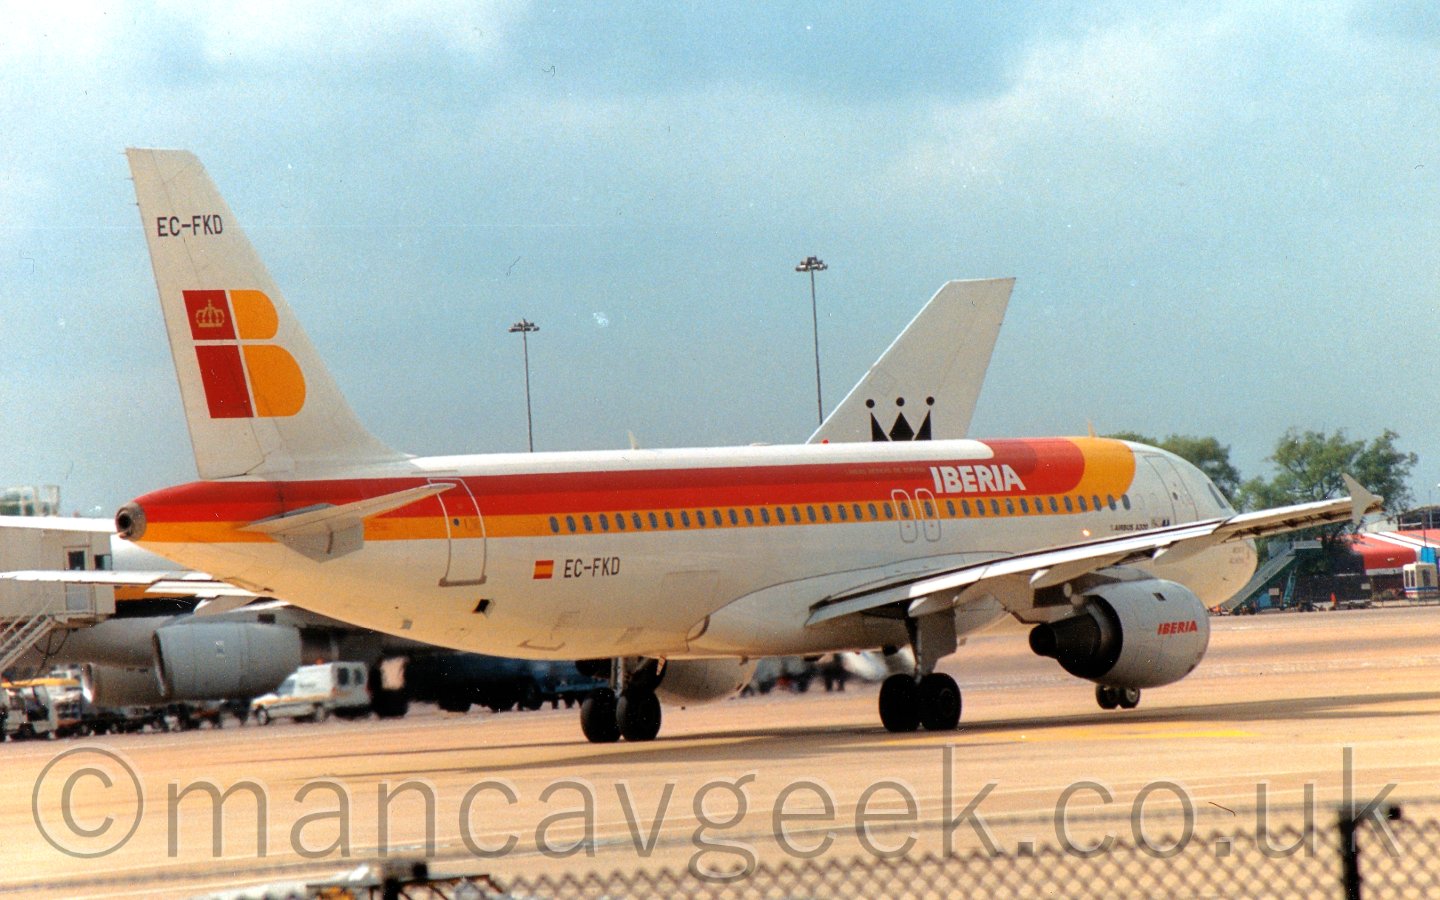 Side view of a white, orange, orange, and yellow, twin engined jet airliner, taxiing from left to right and slightly away from the camera, with another white plane behind it, under a blue sky with bits of white fluff.